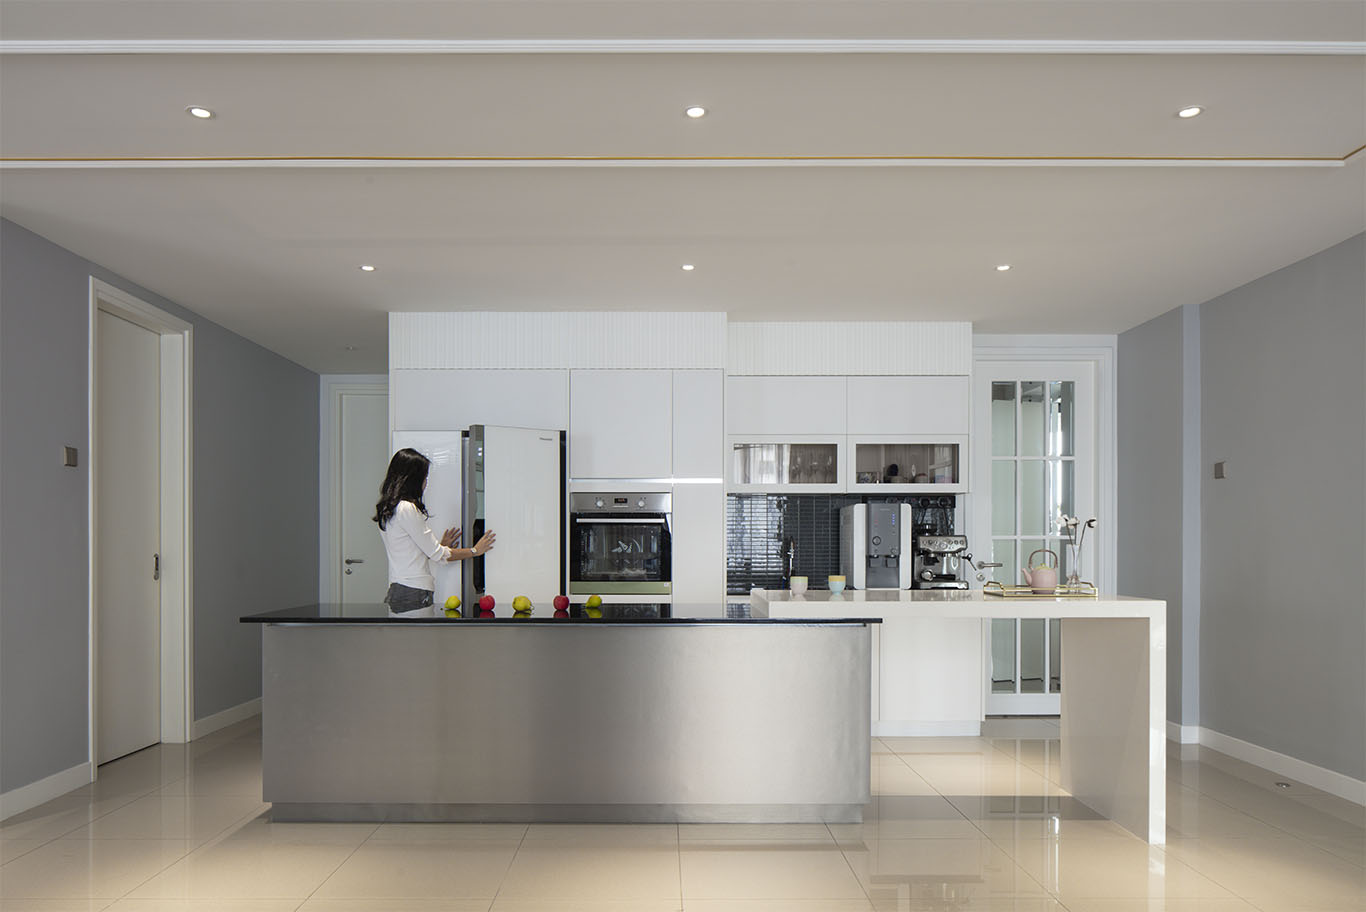 Minimalist open kitchen design with soft baby blue theme, with white kitchen cabinet with built in oven, white fridge, round ceiling light, and black and white countertop